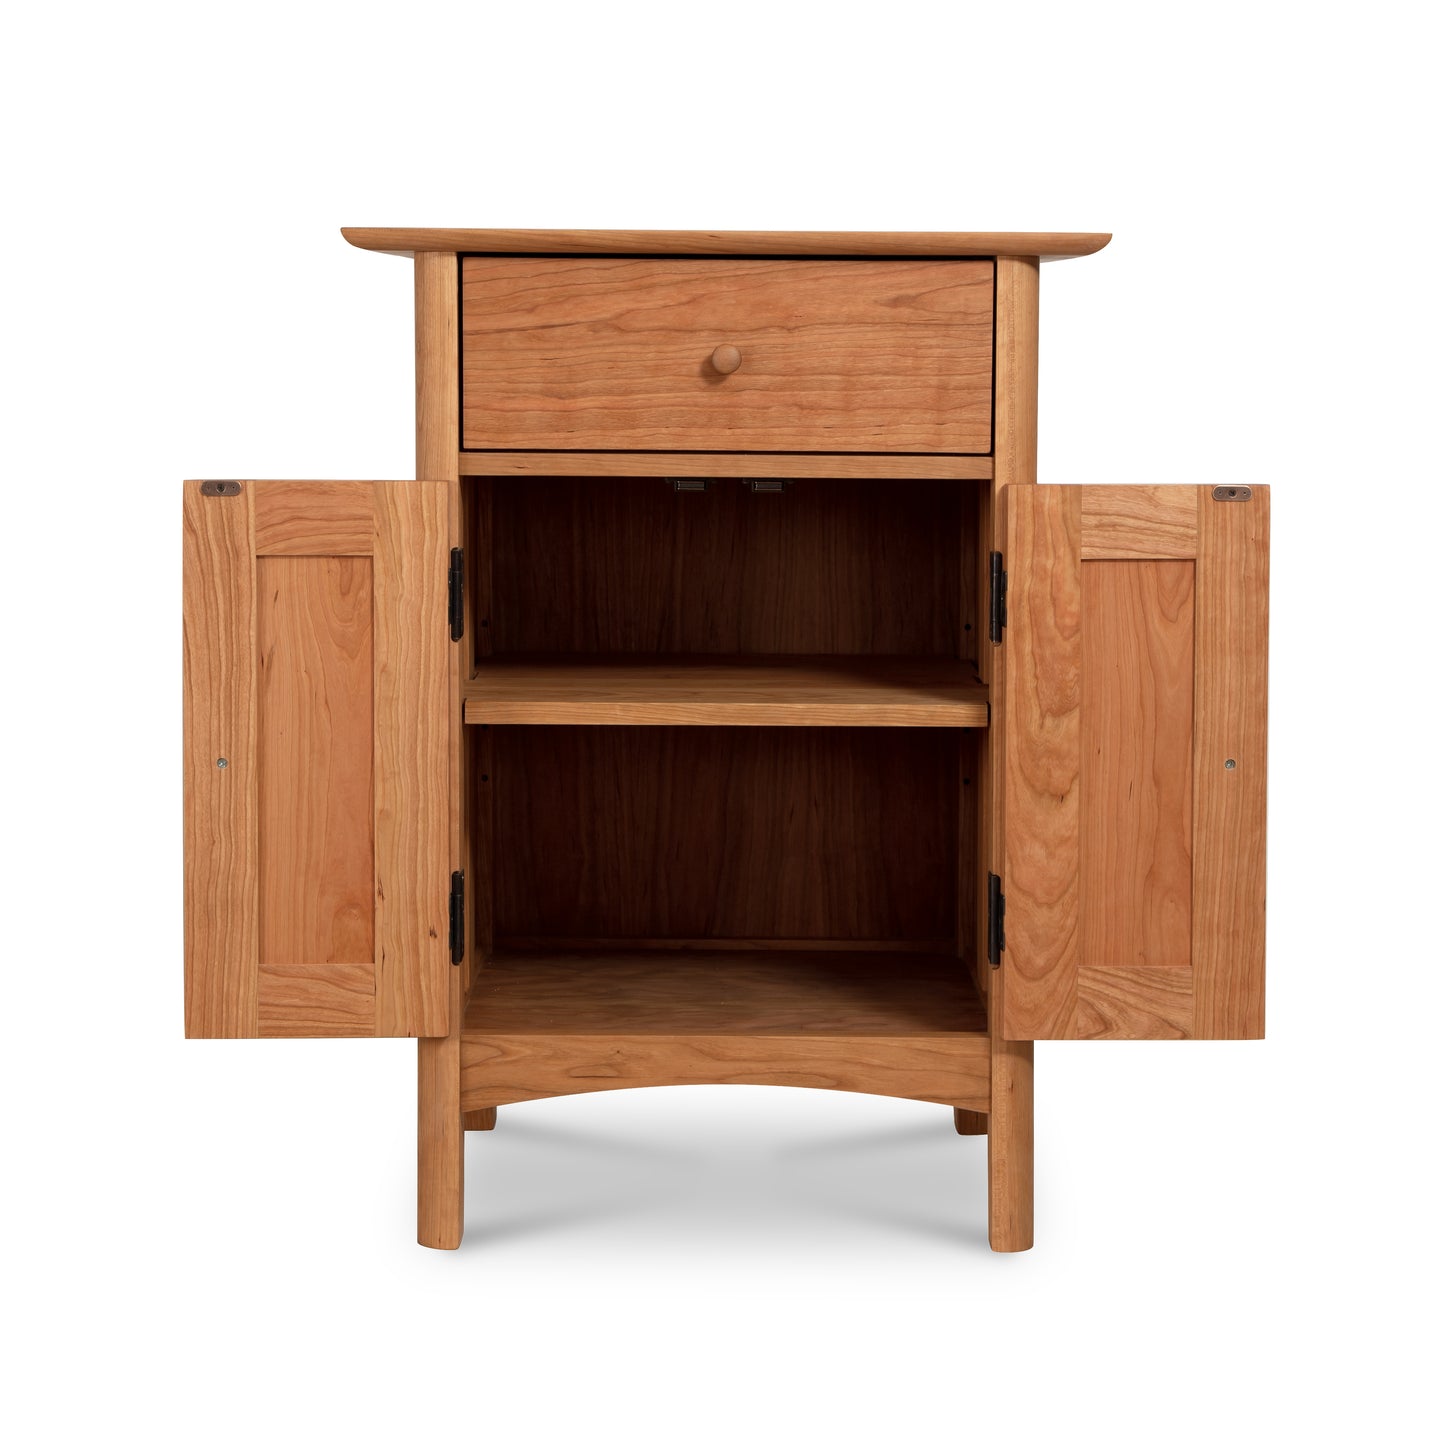 A wooden nightstand with two drawers and an open shelf.